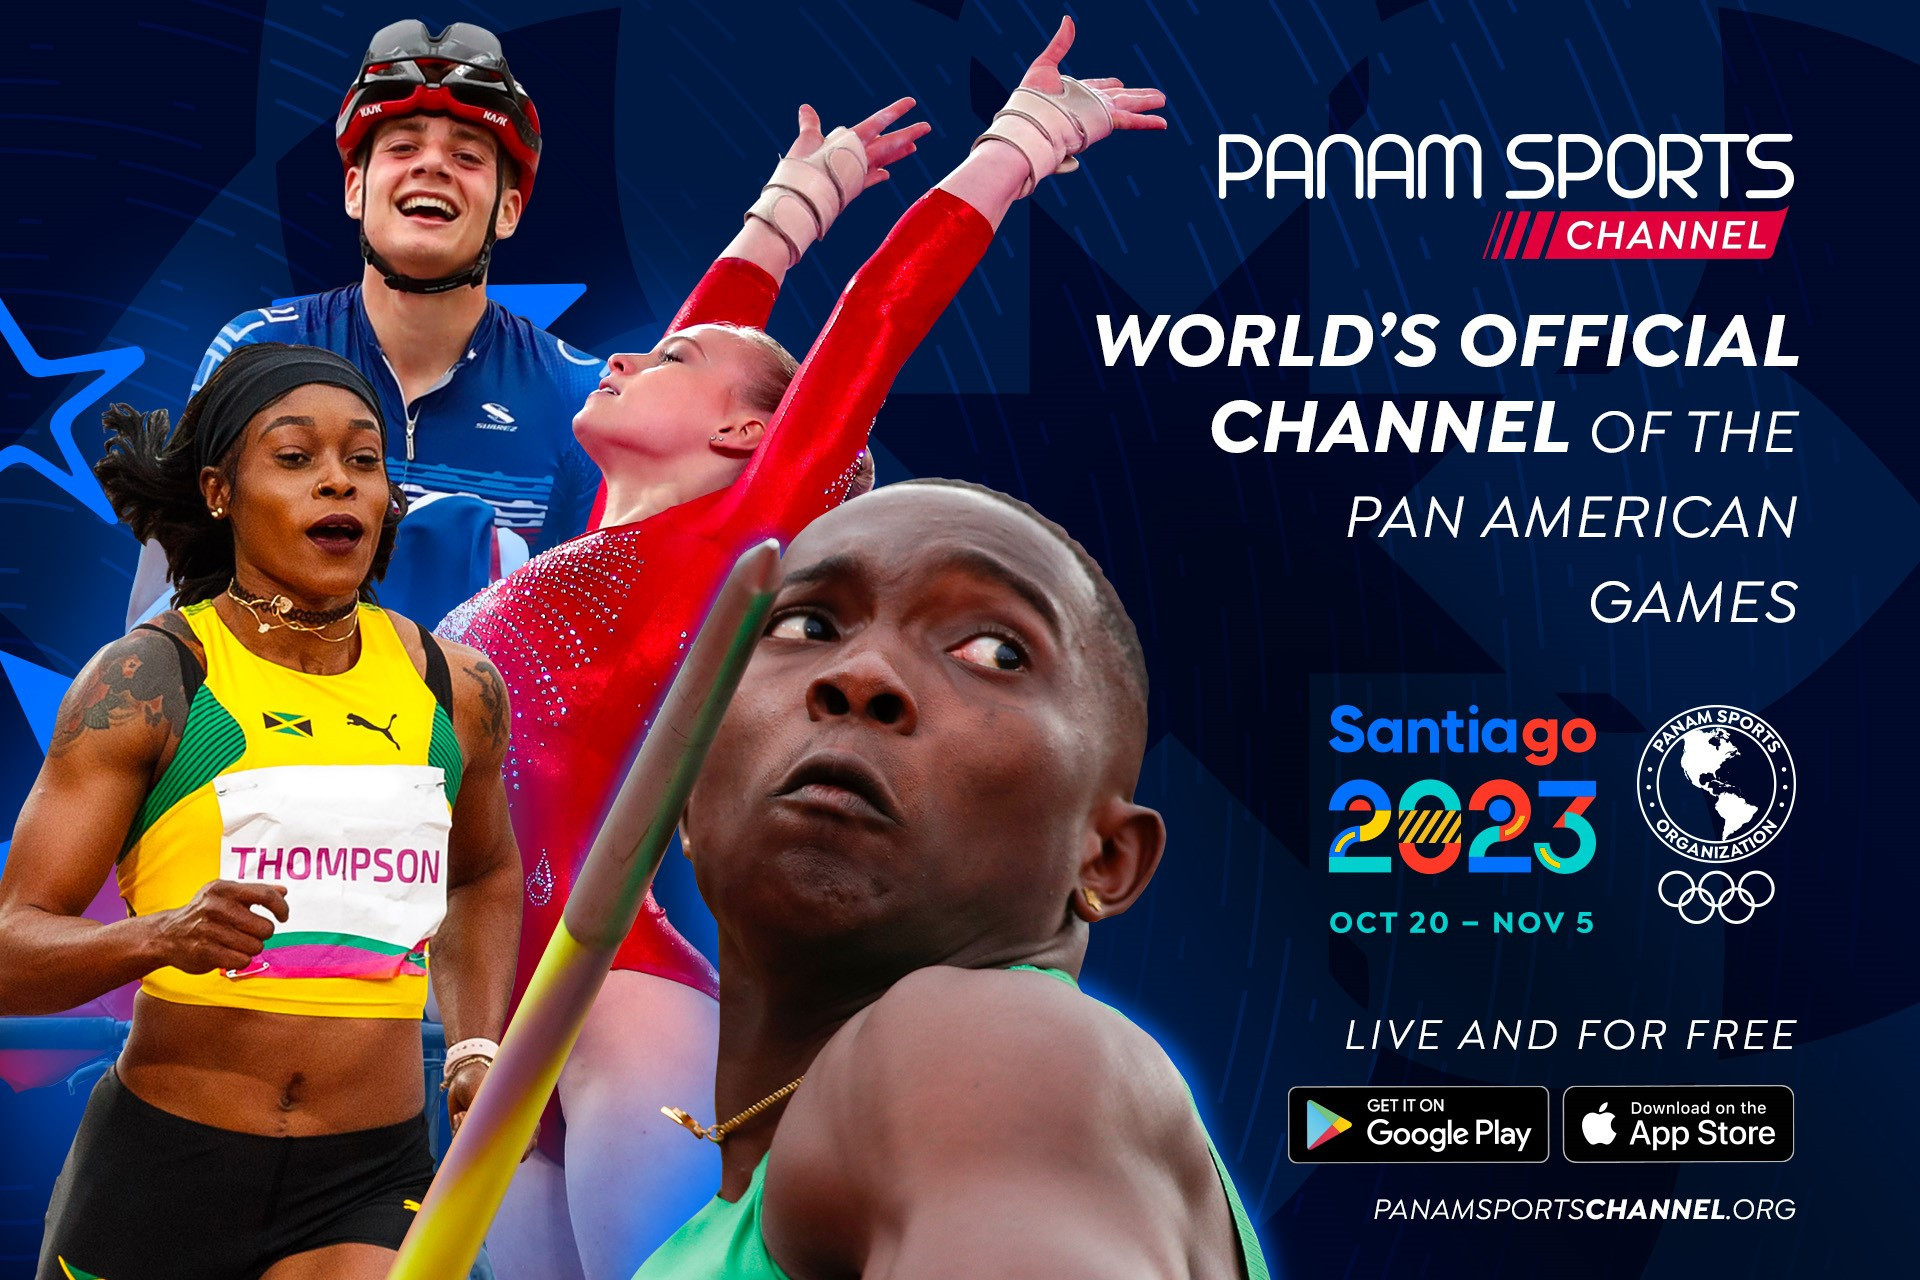 Panam Sports Channel to provide world-wide free coverage of Santiago 2023